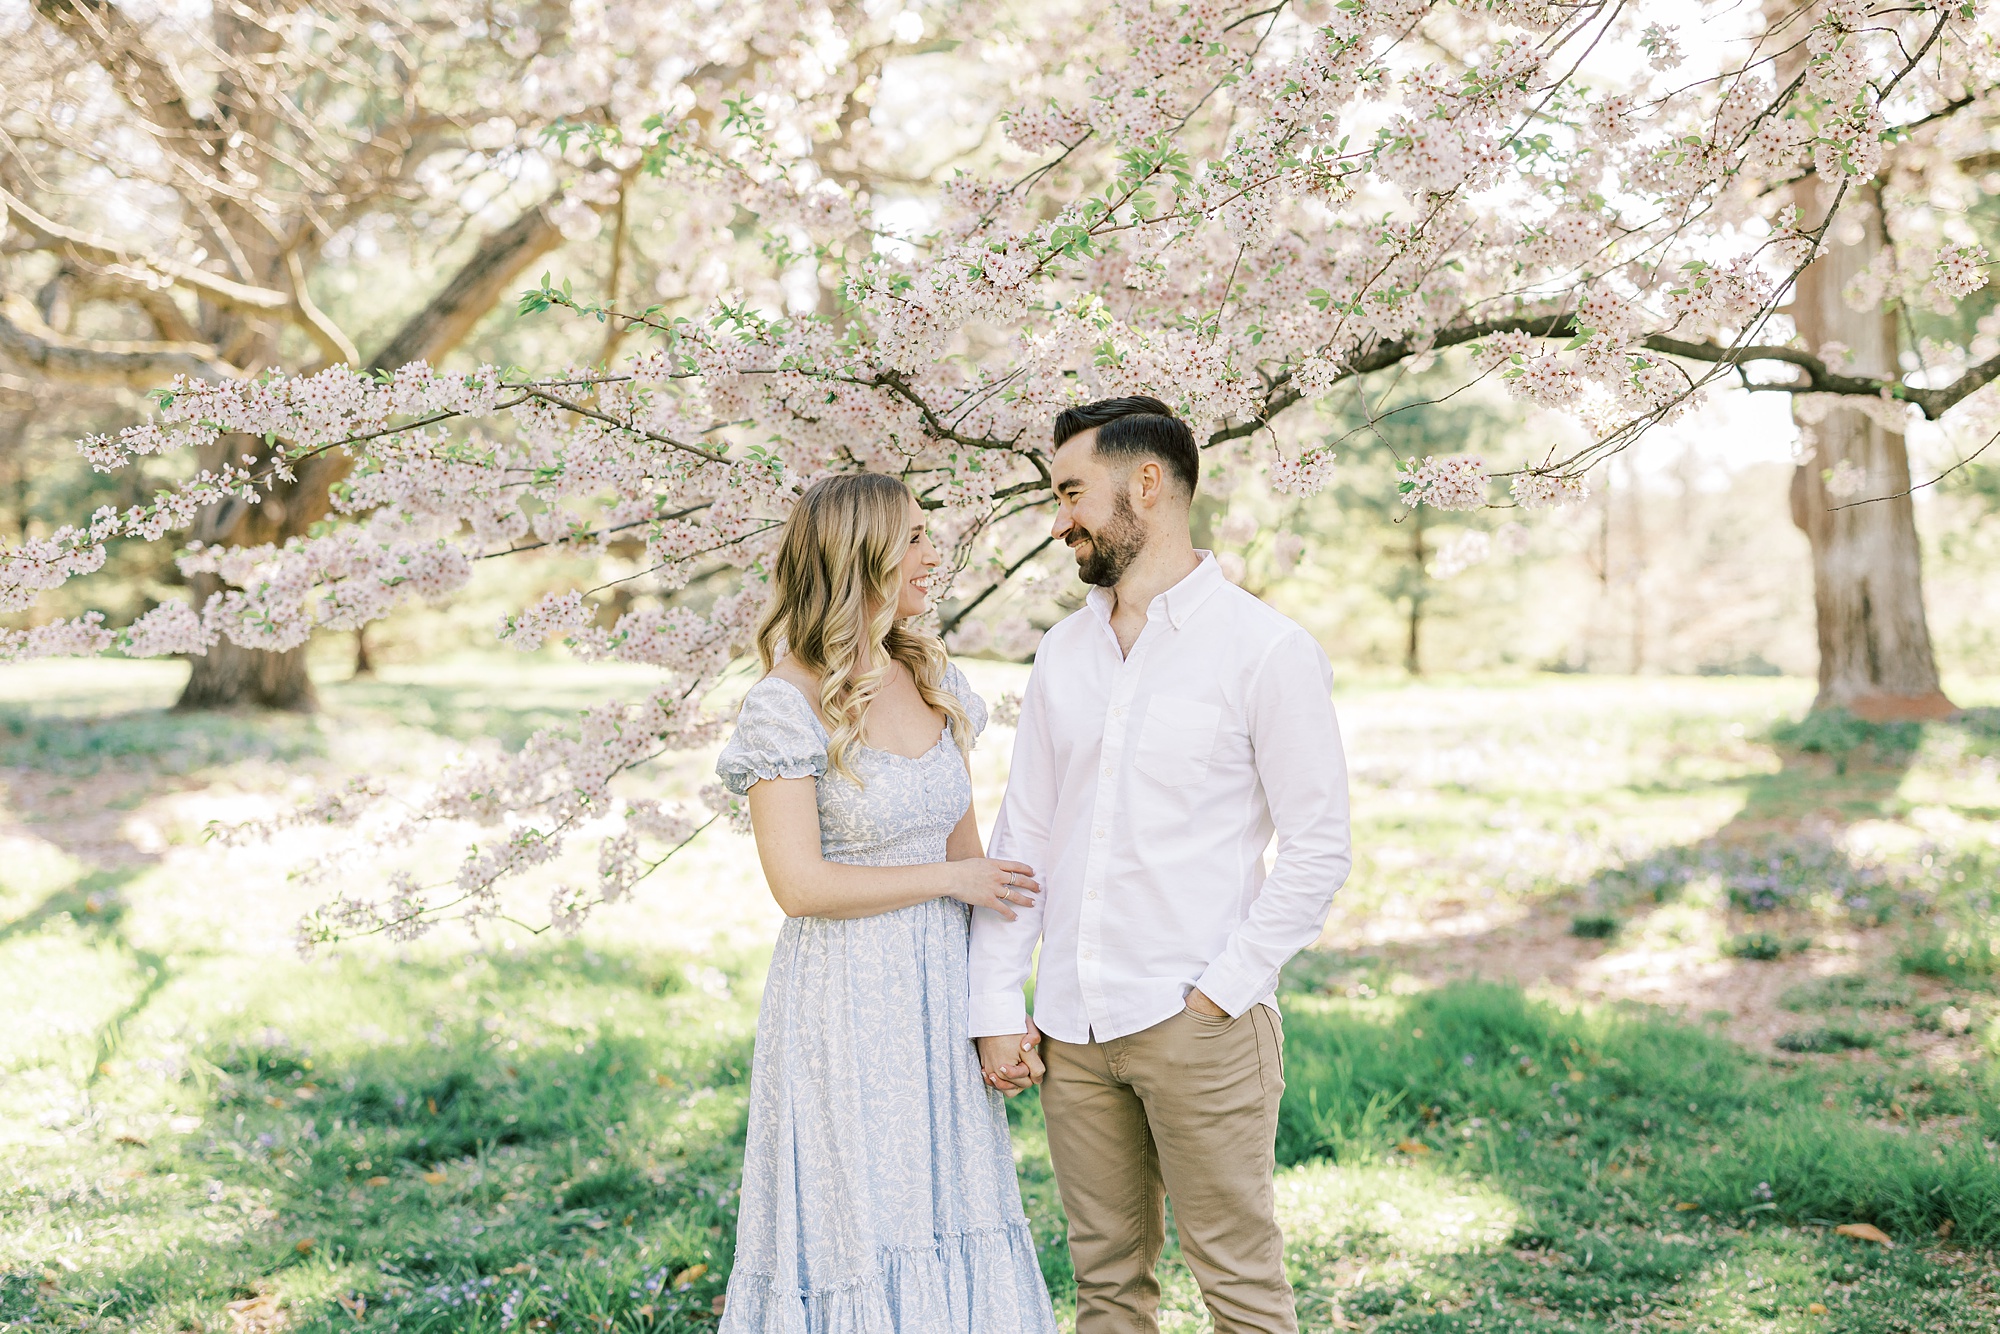 woman looks up at man holding his arm in front of cherry blossom tree